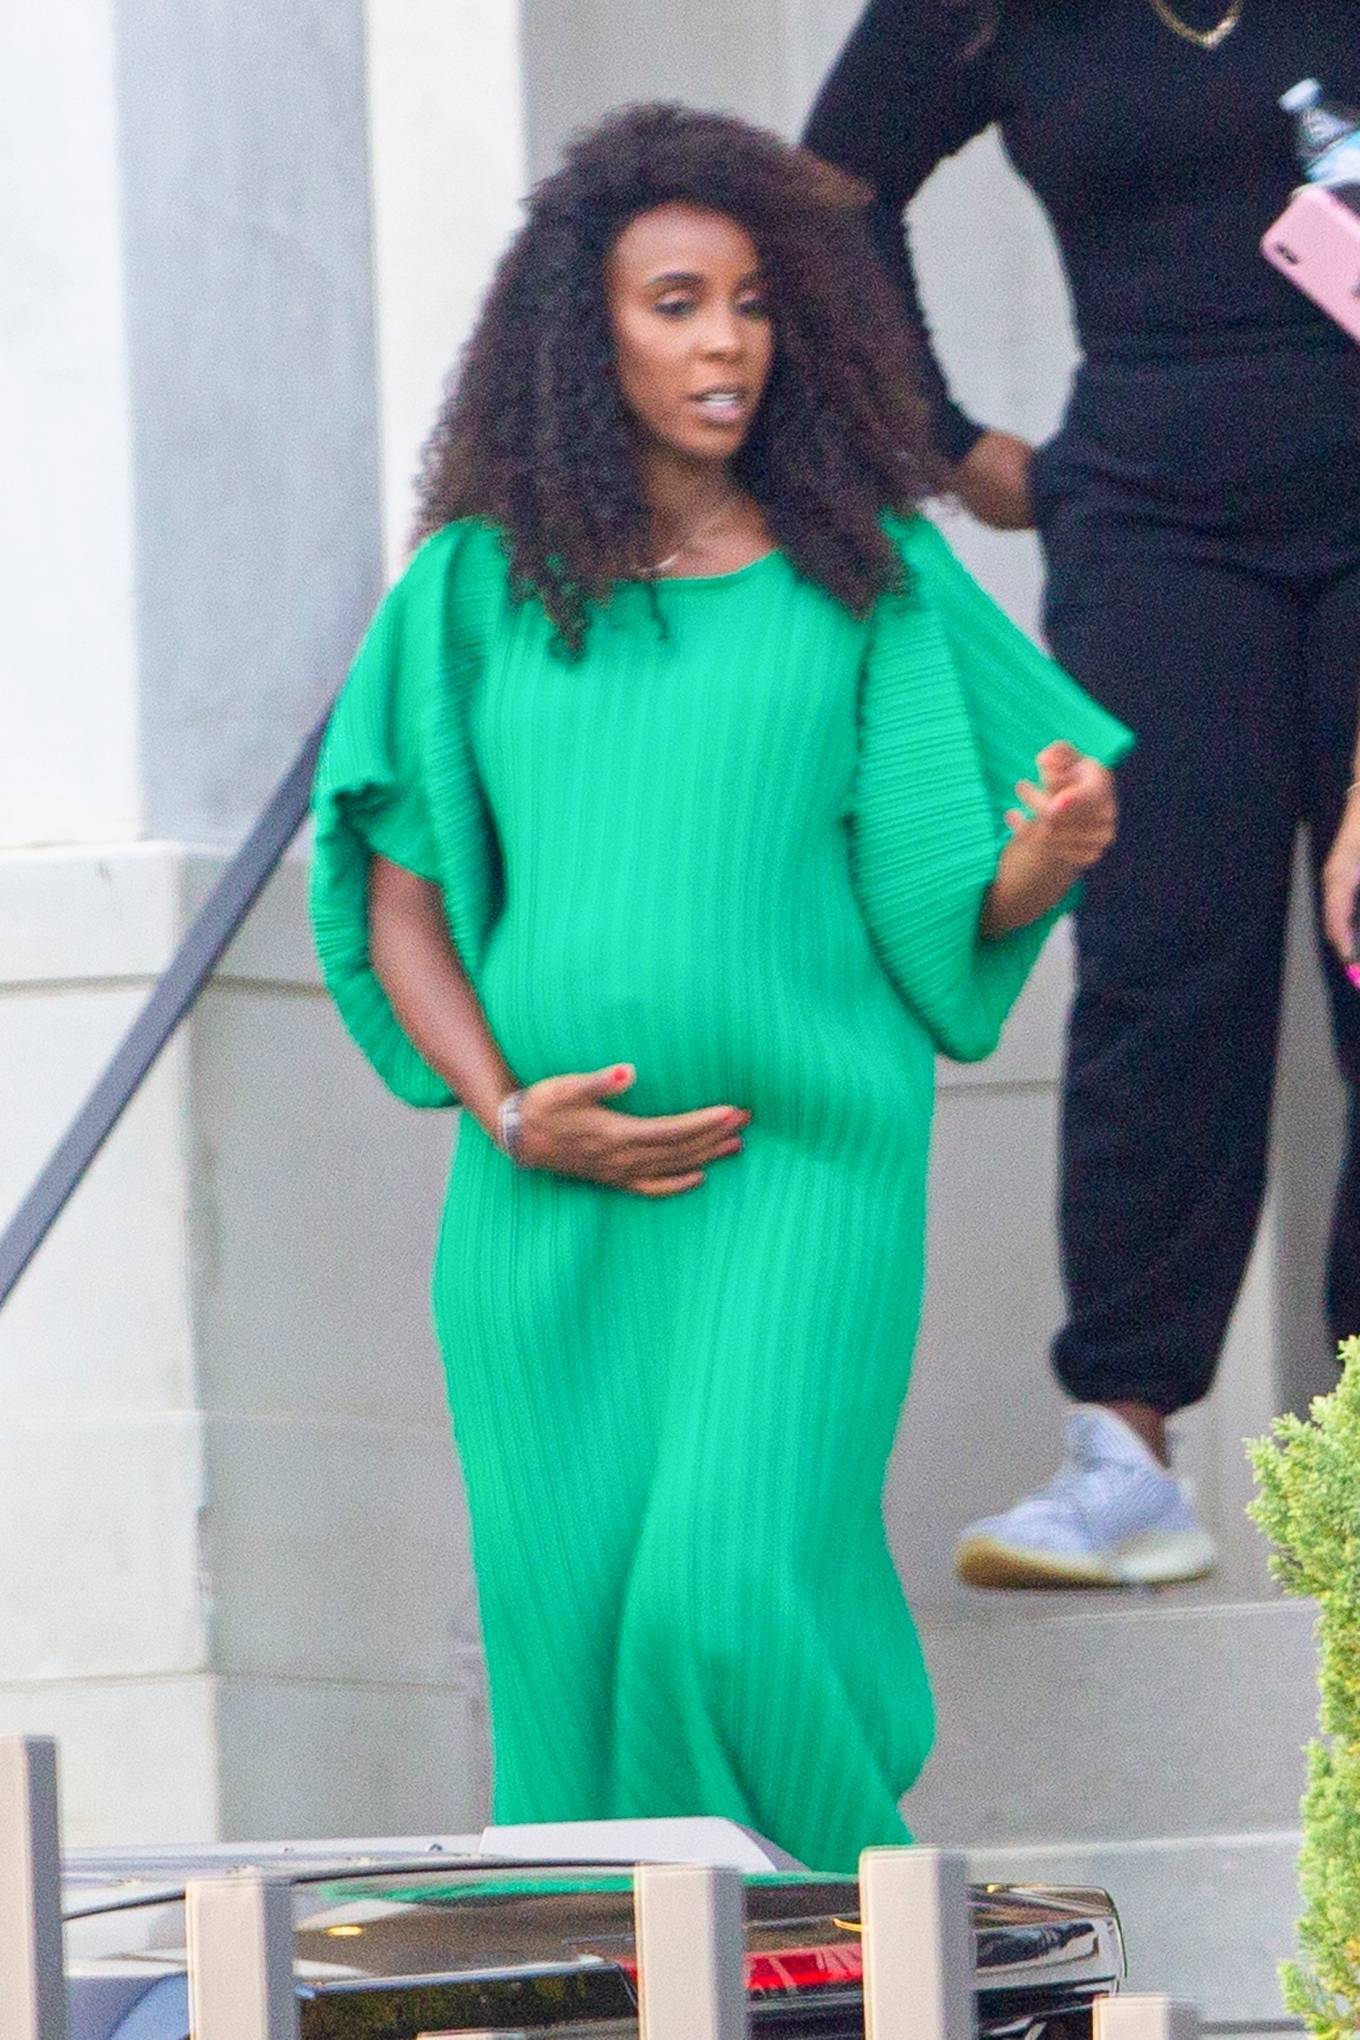 Pregnant Kelly Rowland – iI a green dress leaving a photo shoot in Brentwood